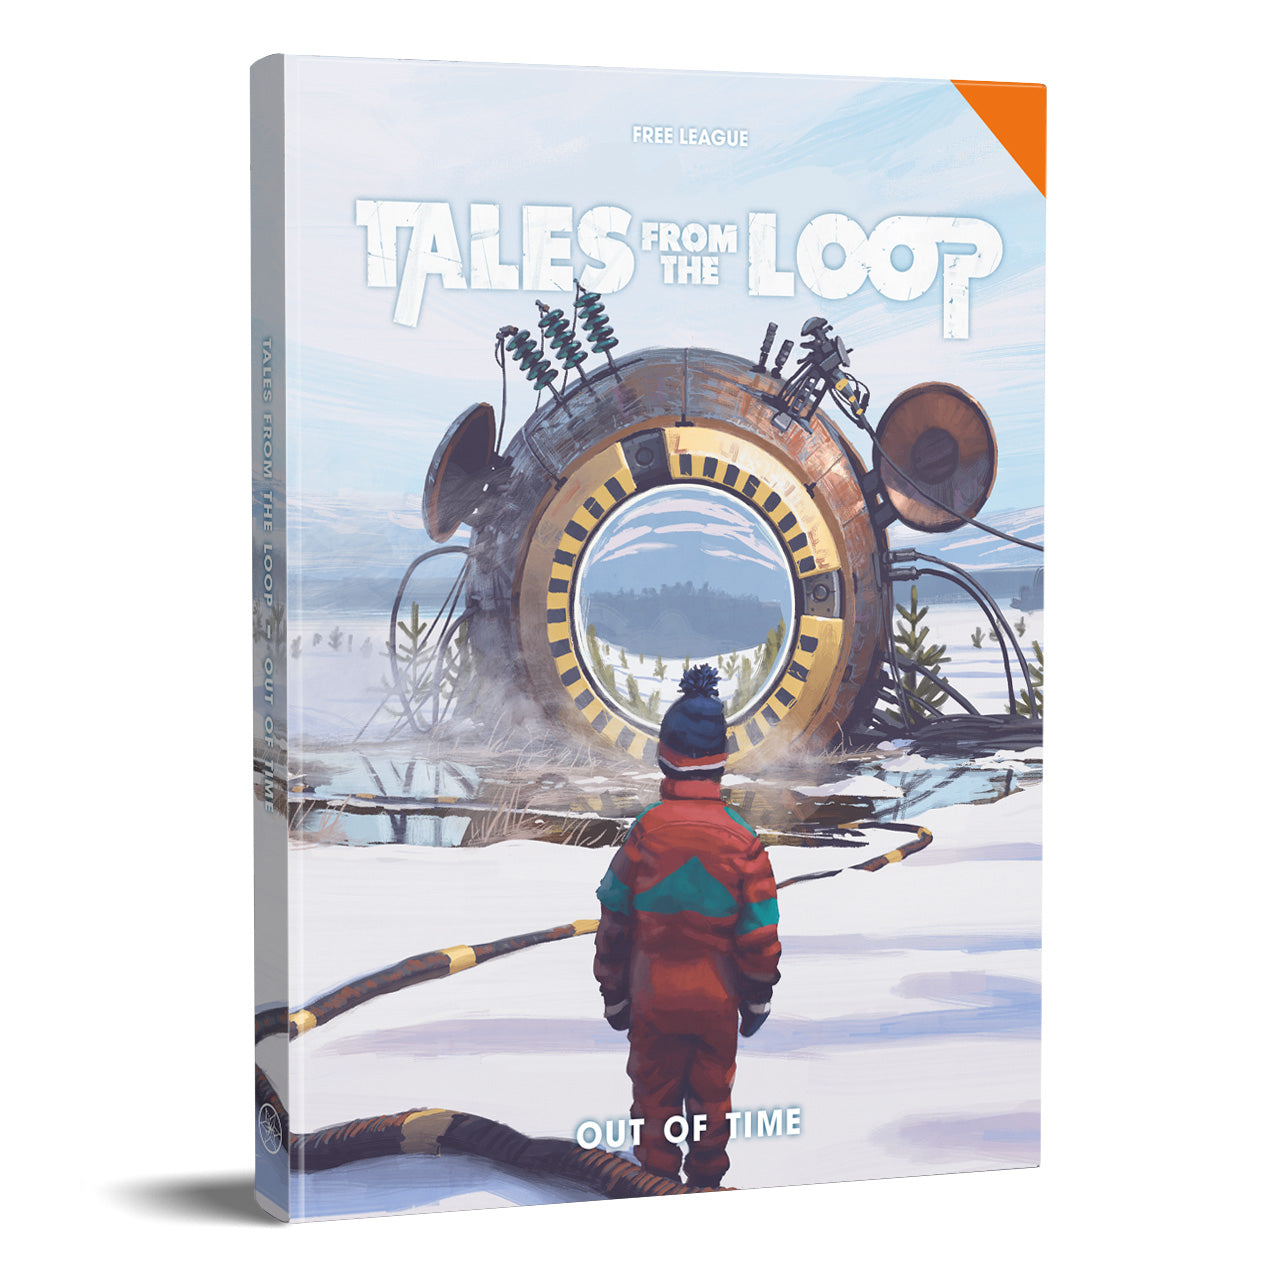 Out of Time: Tales from the Loop RPG (T.O.S.) -  Free League